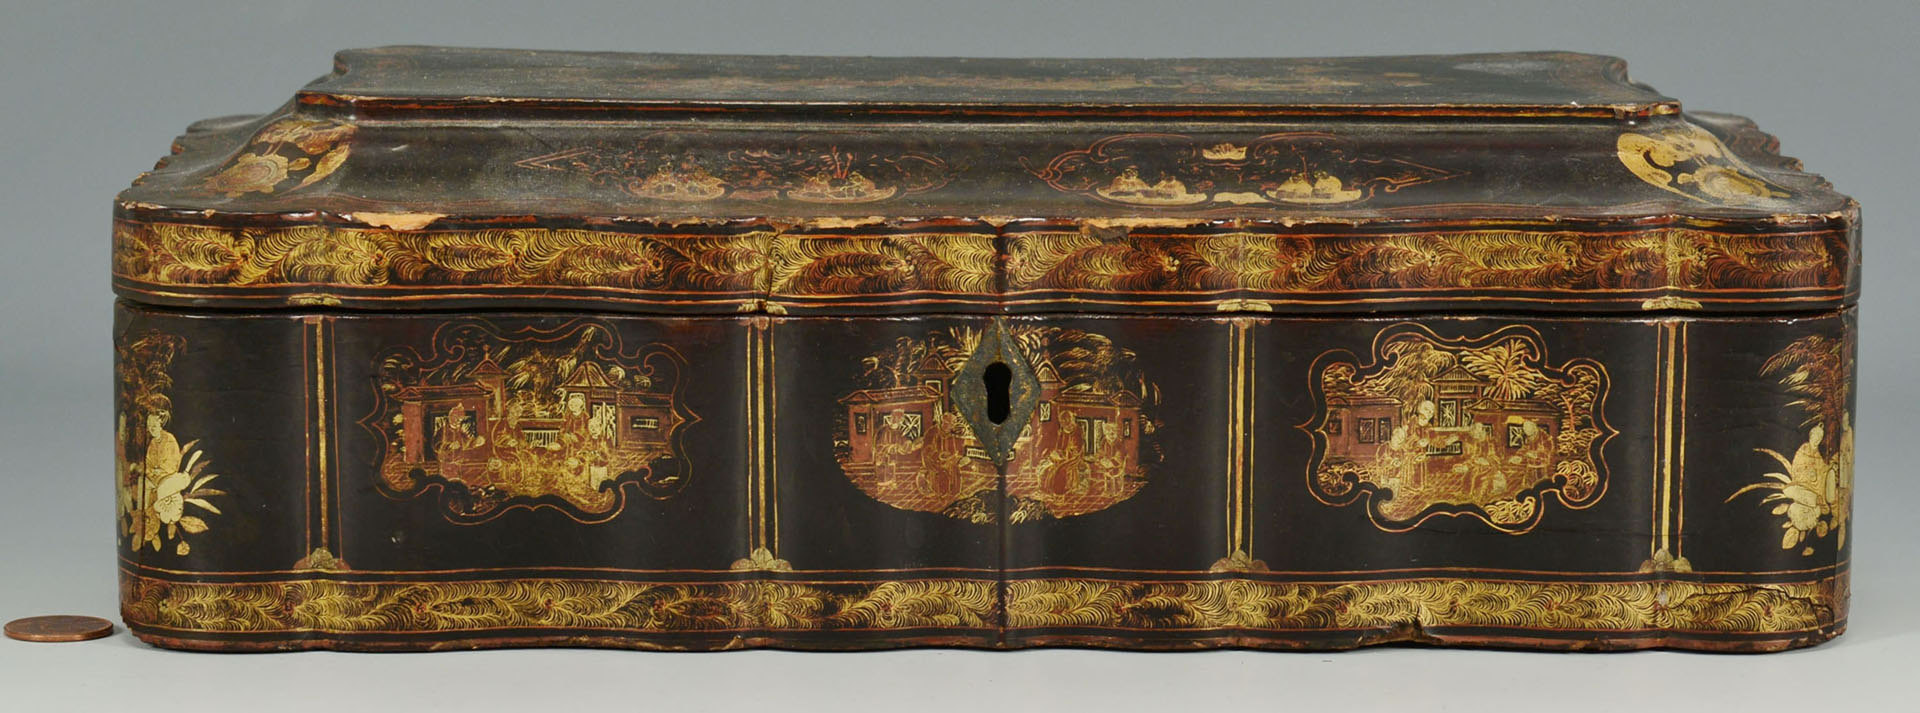 Lot 214: Chinese Export lacquered trinket box